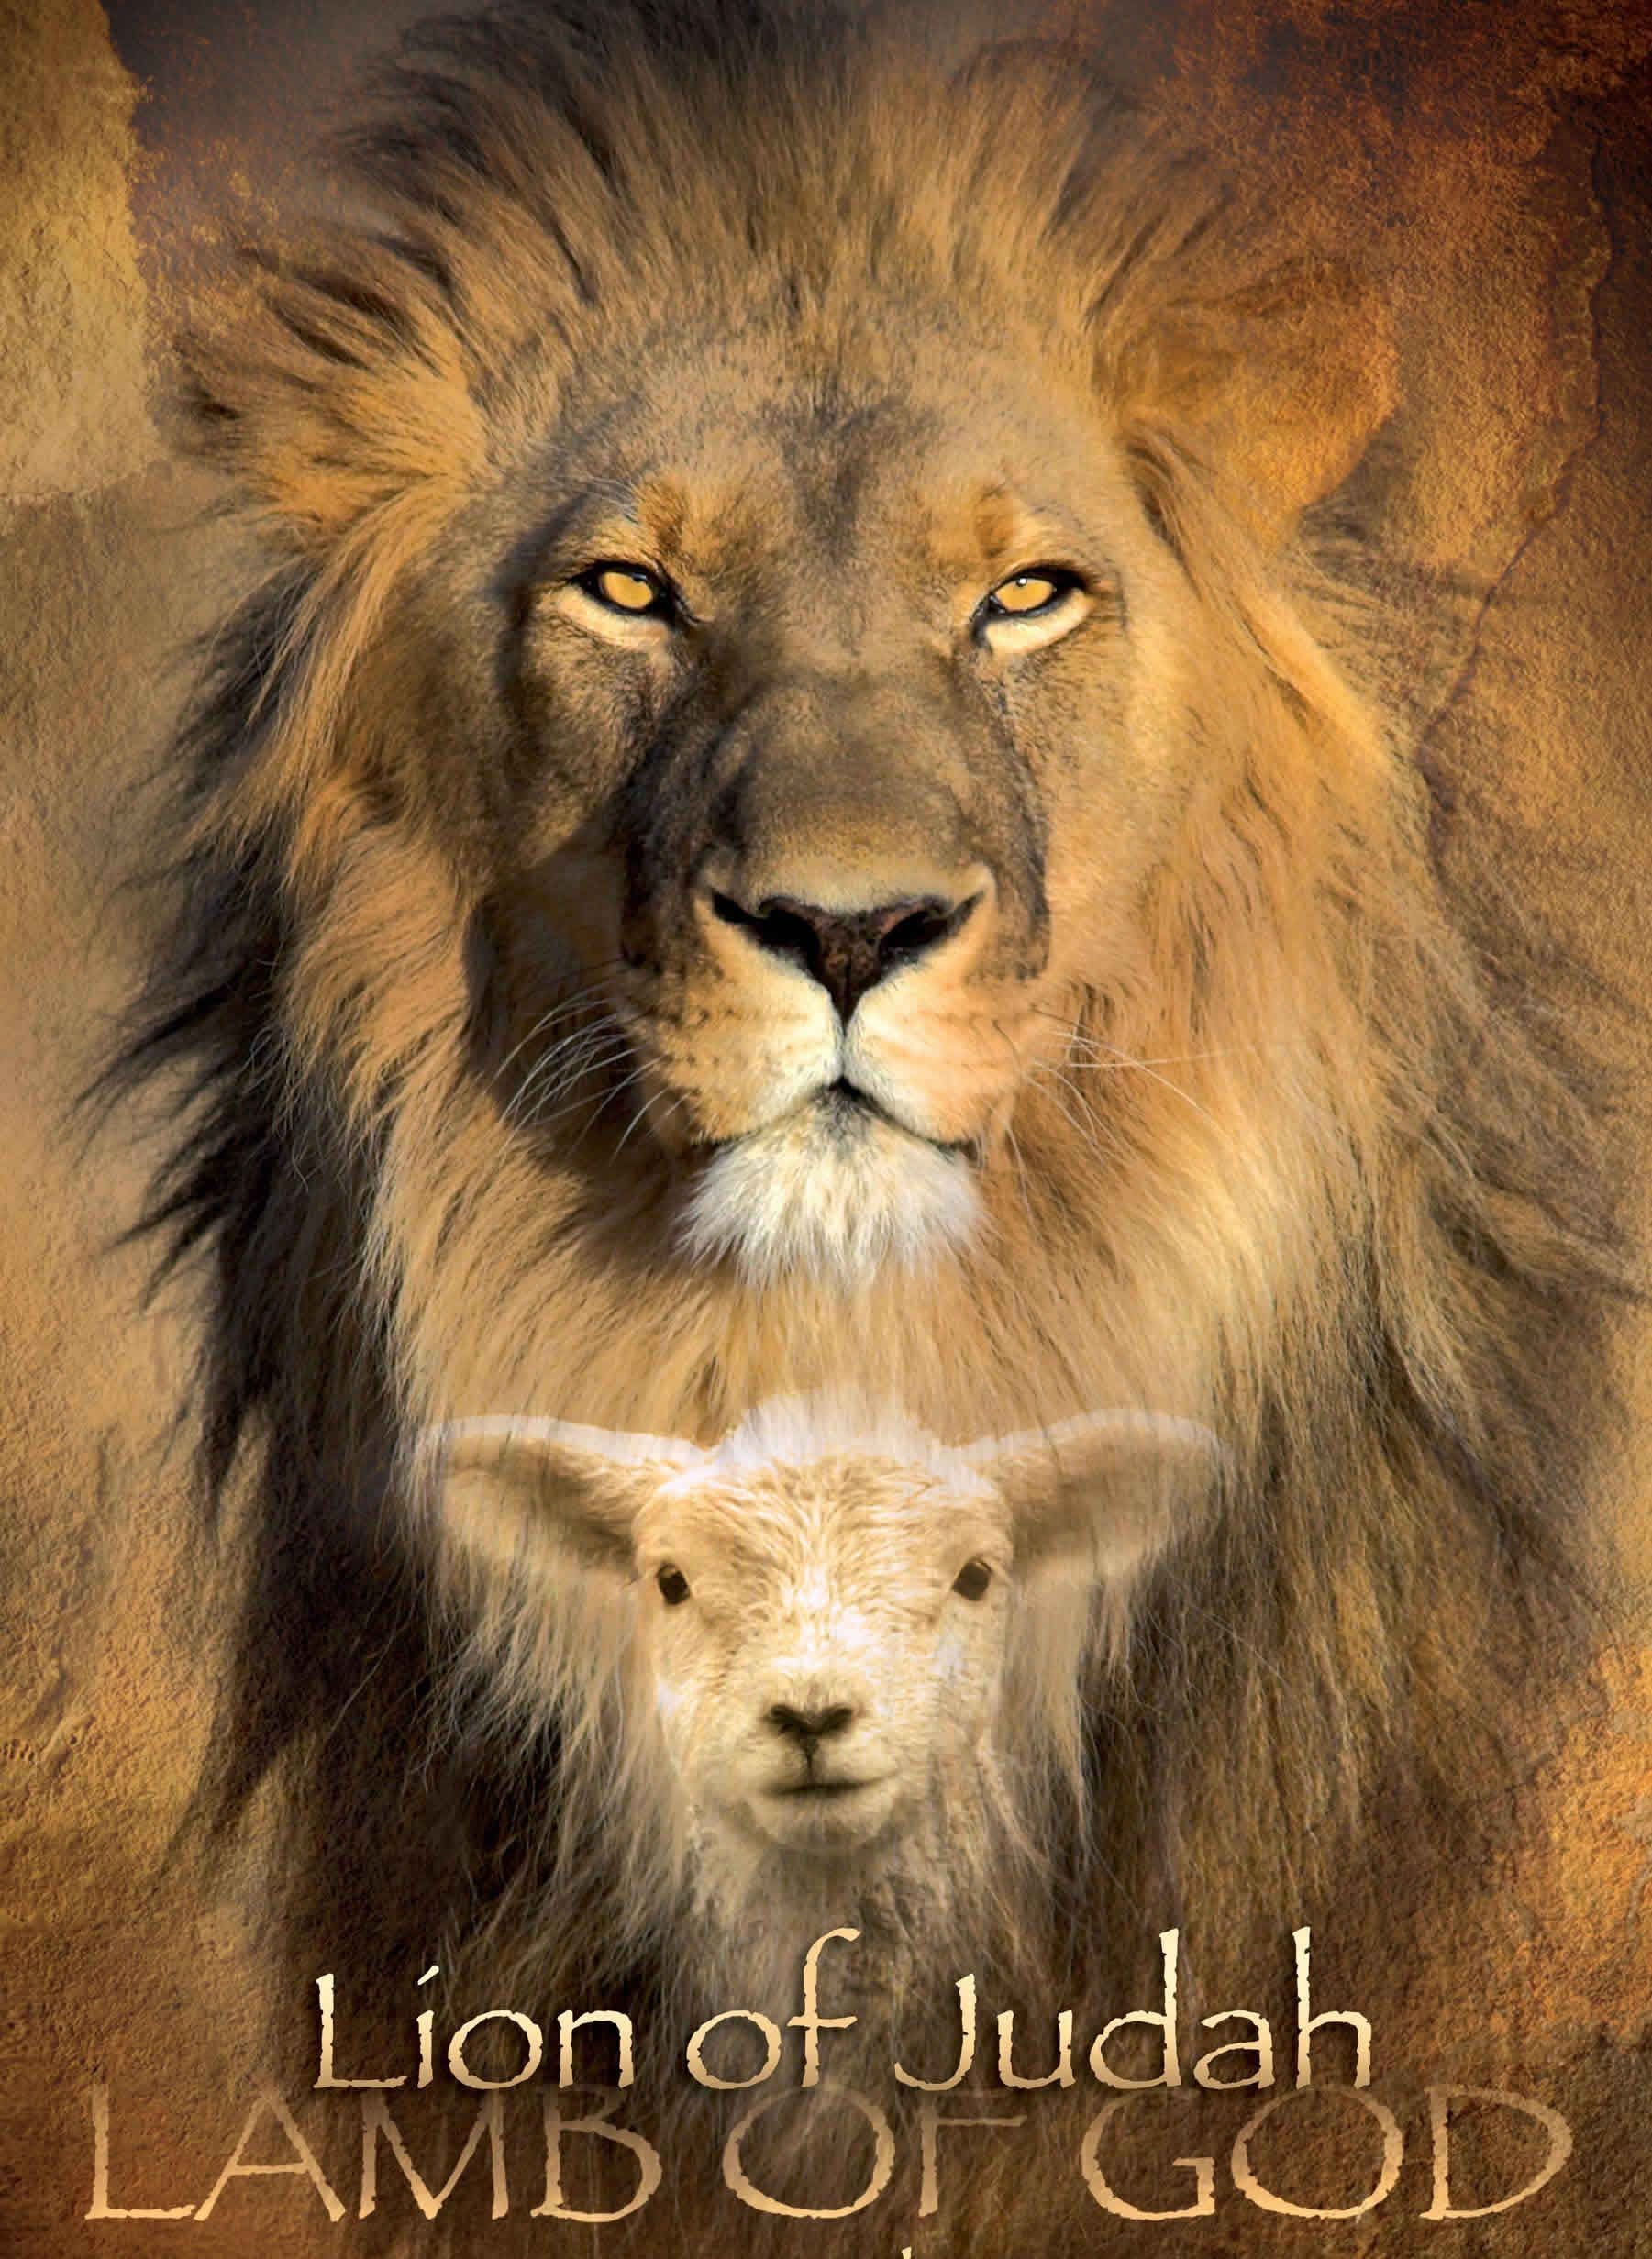 The LION and the LAMB